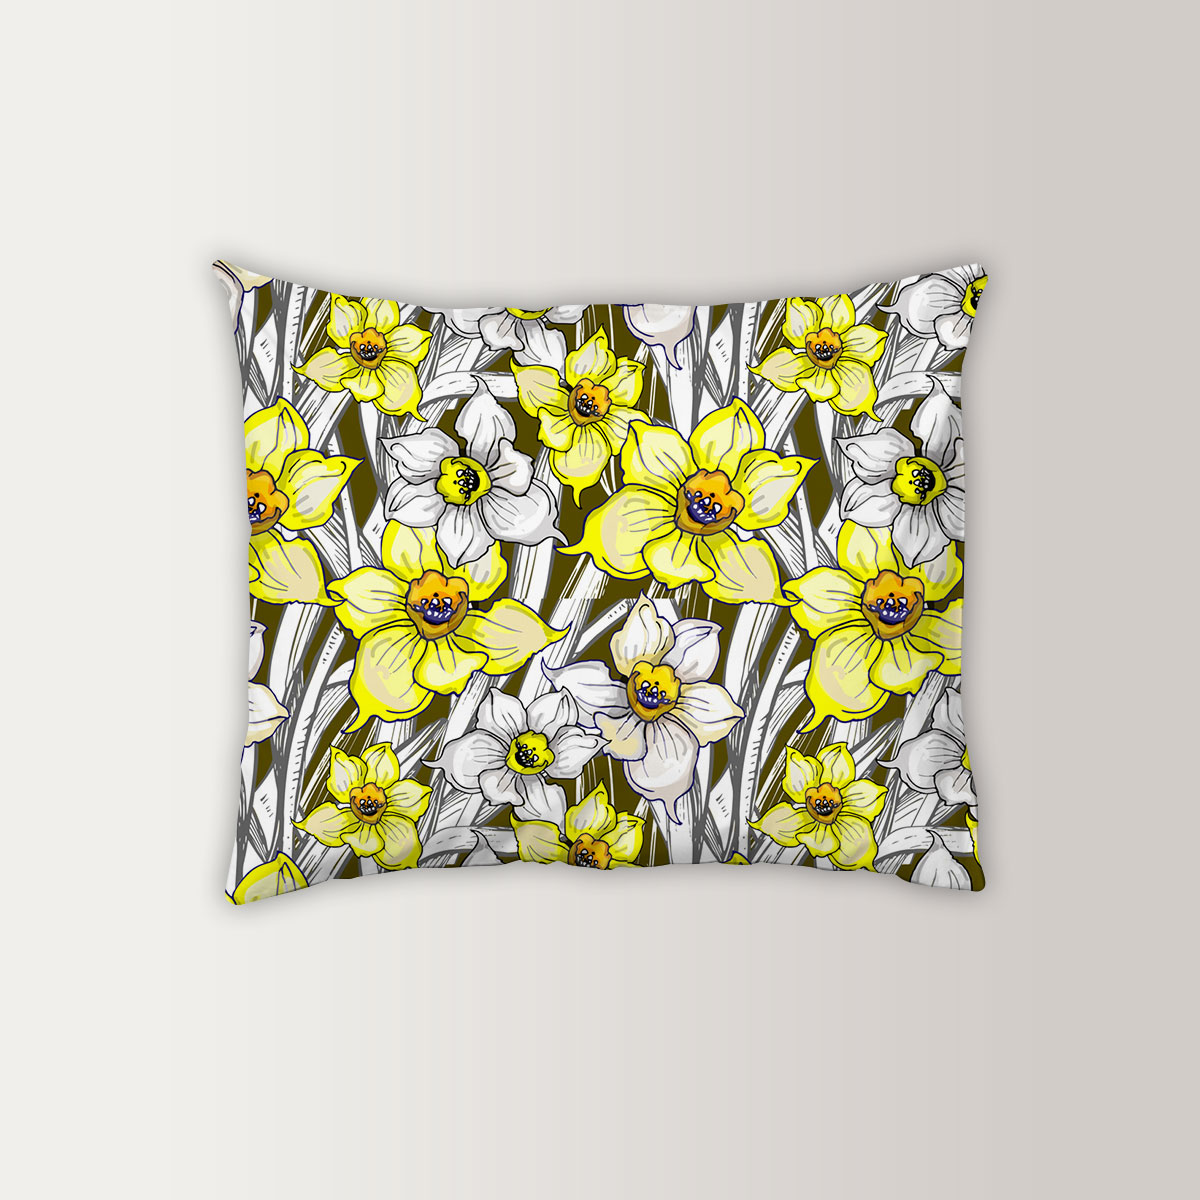 Botanical With Flowers Of Narcissus Daffodil Pillow Case